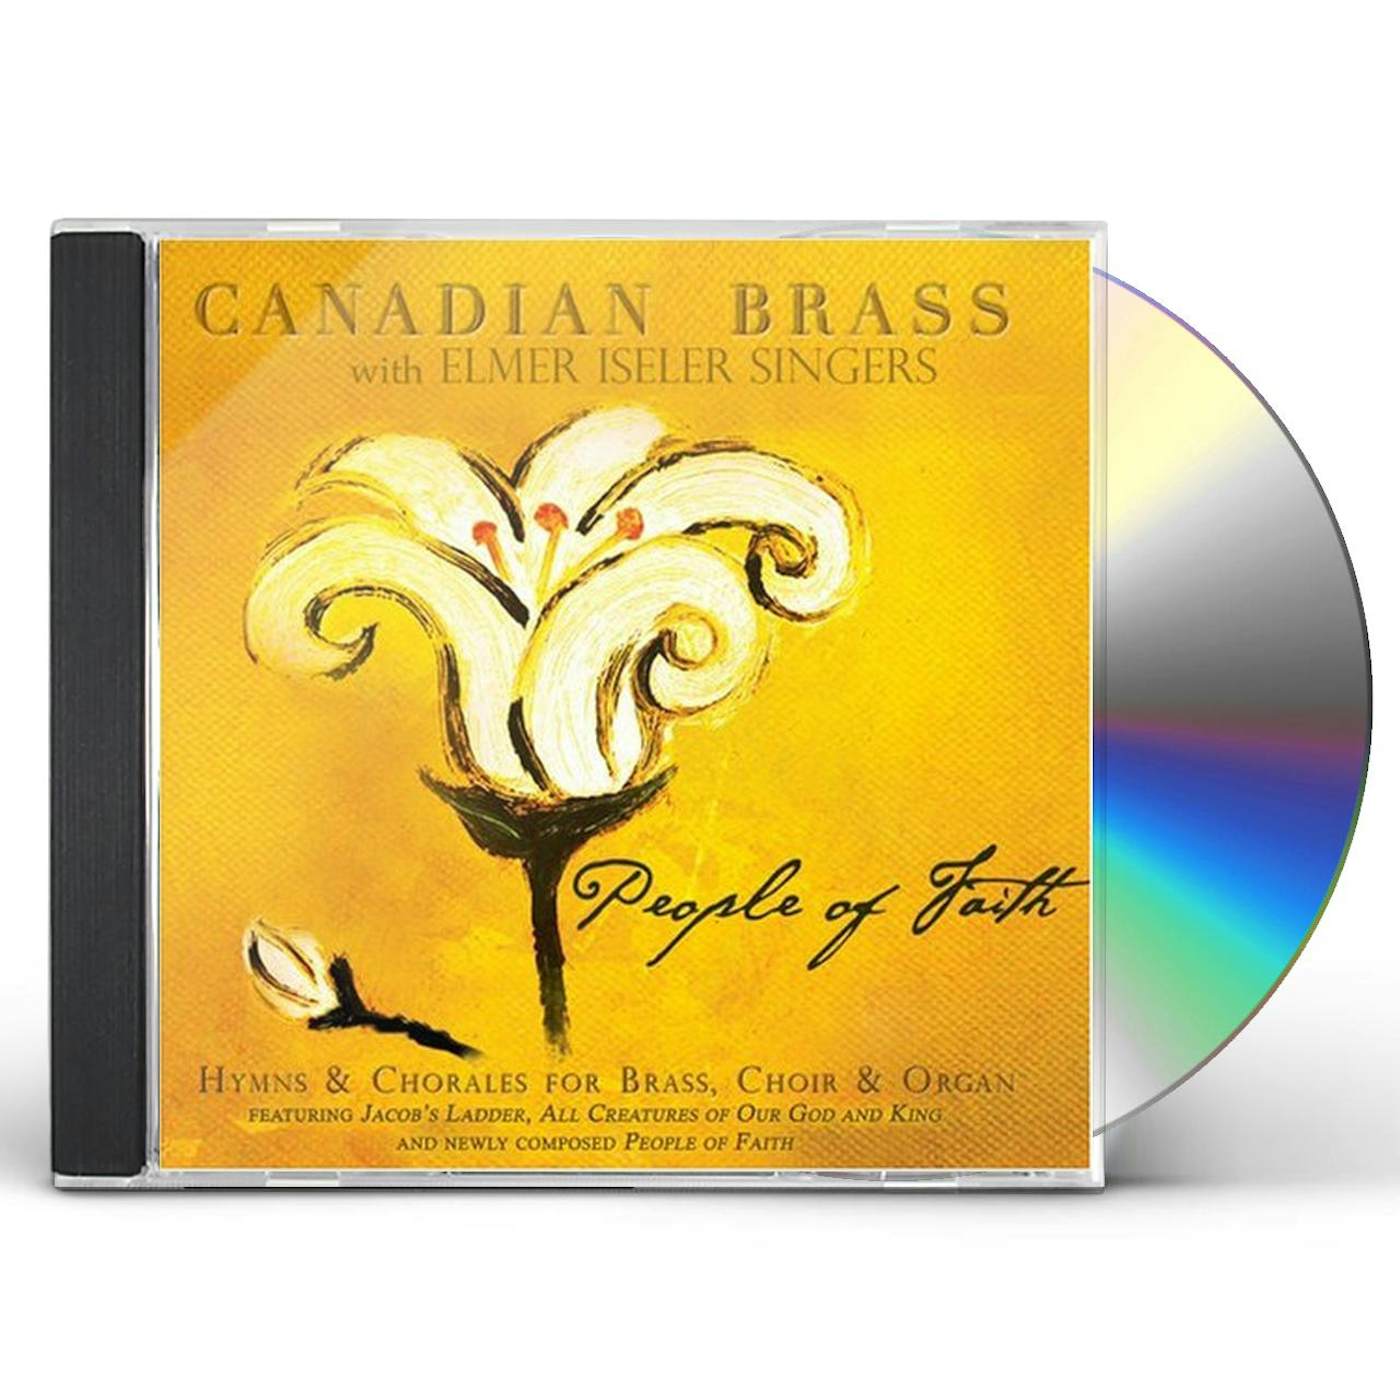 Canadian Brass PEOPLE OF FAITH CD